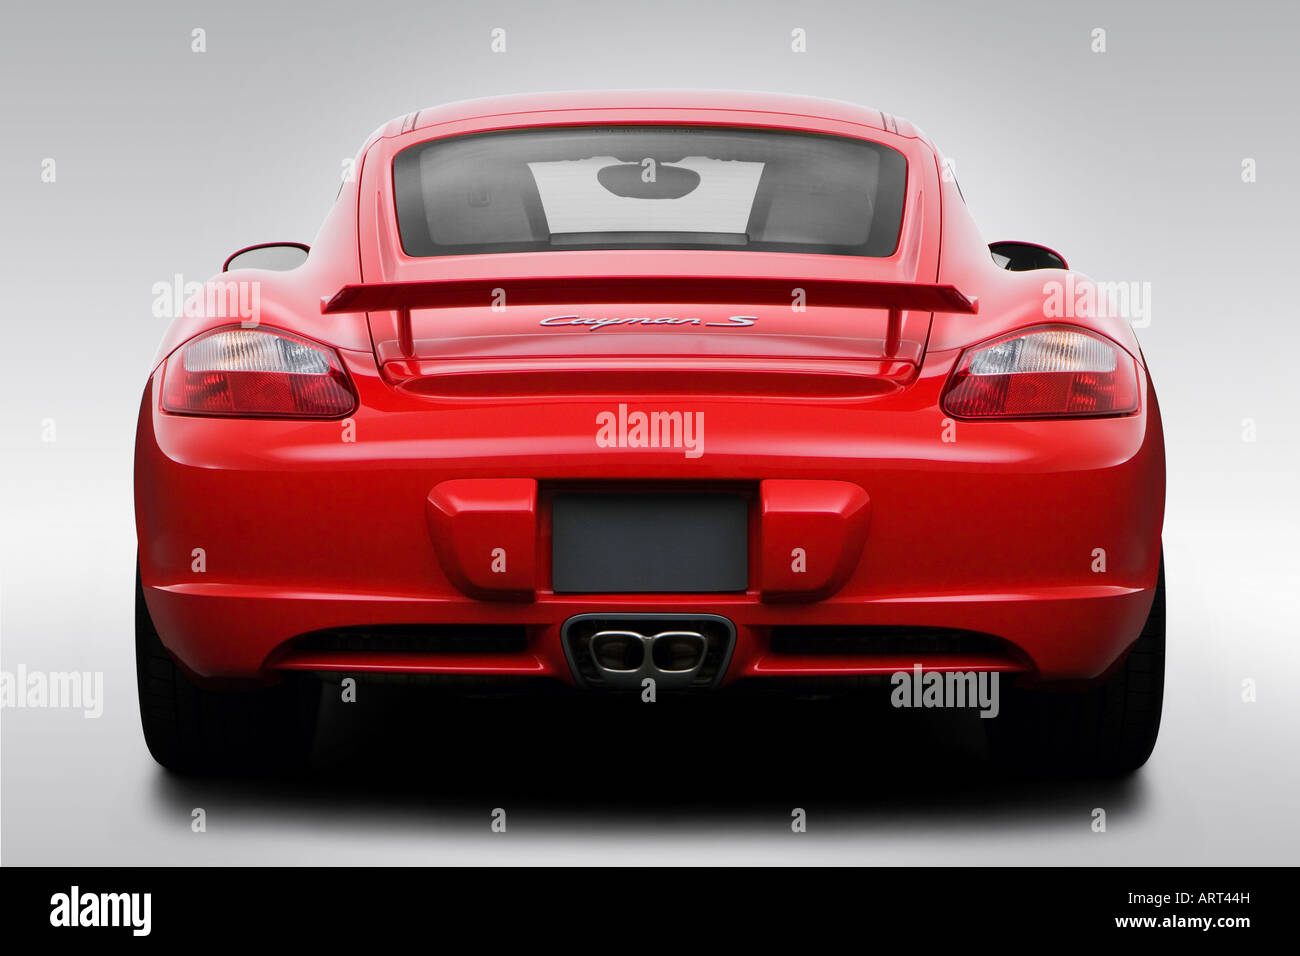 2008 Porsche Cayman S in Red - Low/Wide Rear Stock Photo